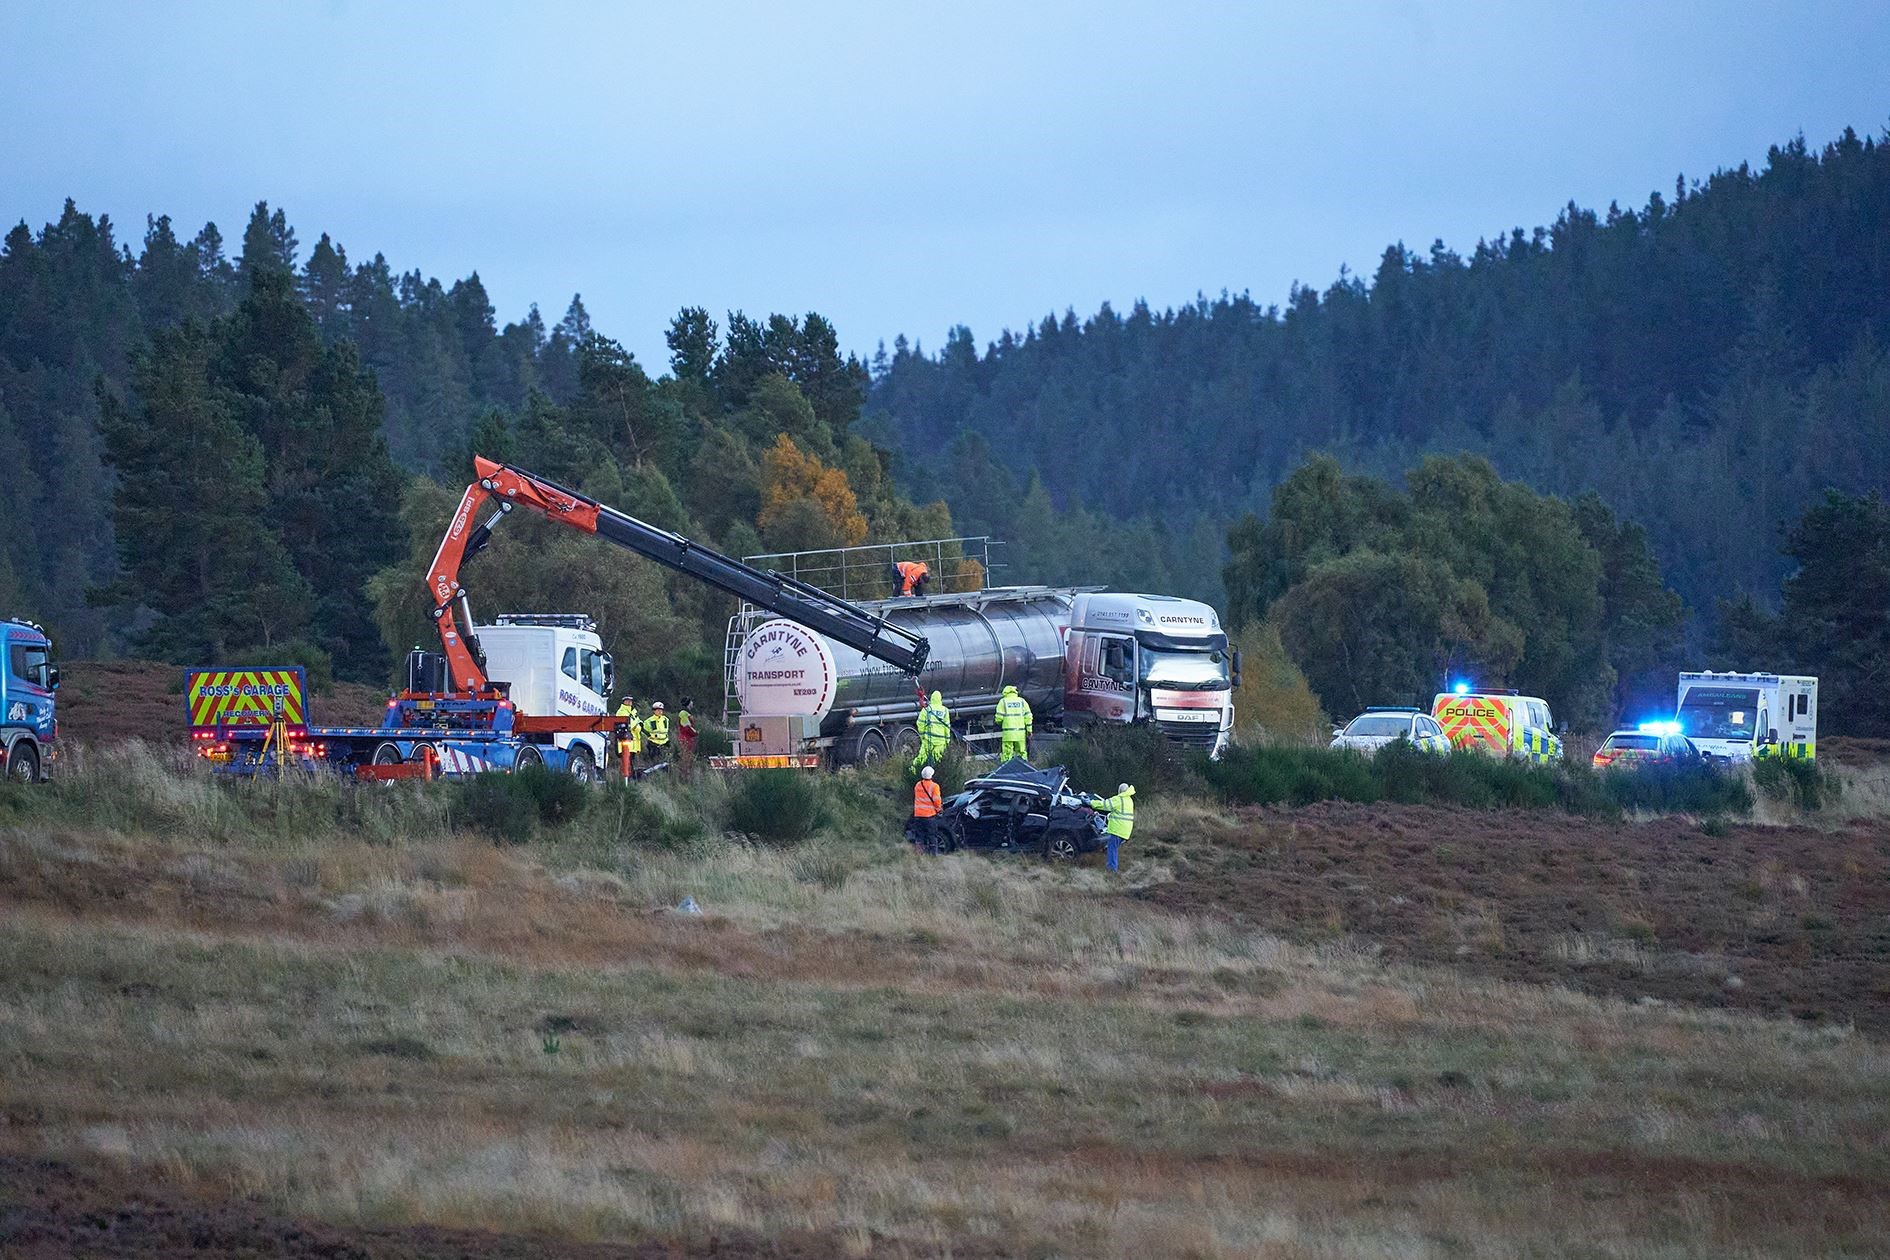 A recovery vehicle at the scene of the fatal accident on Dava Moor. Picture: Jasper Images.